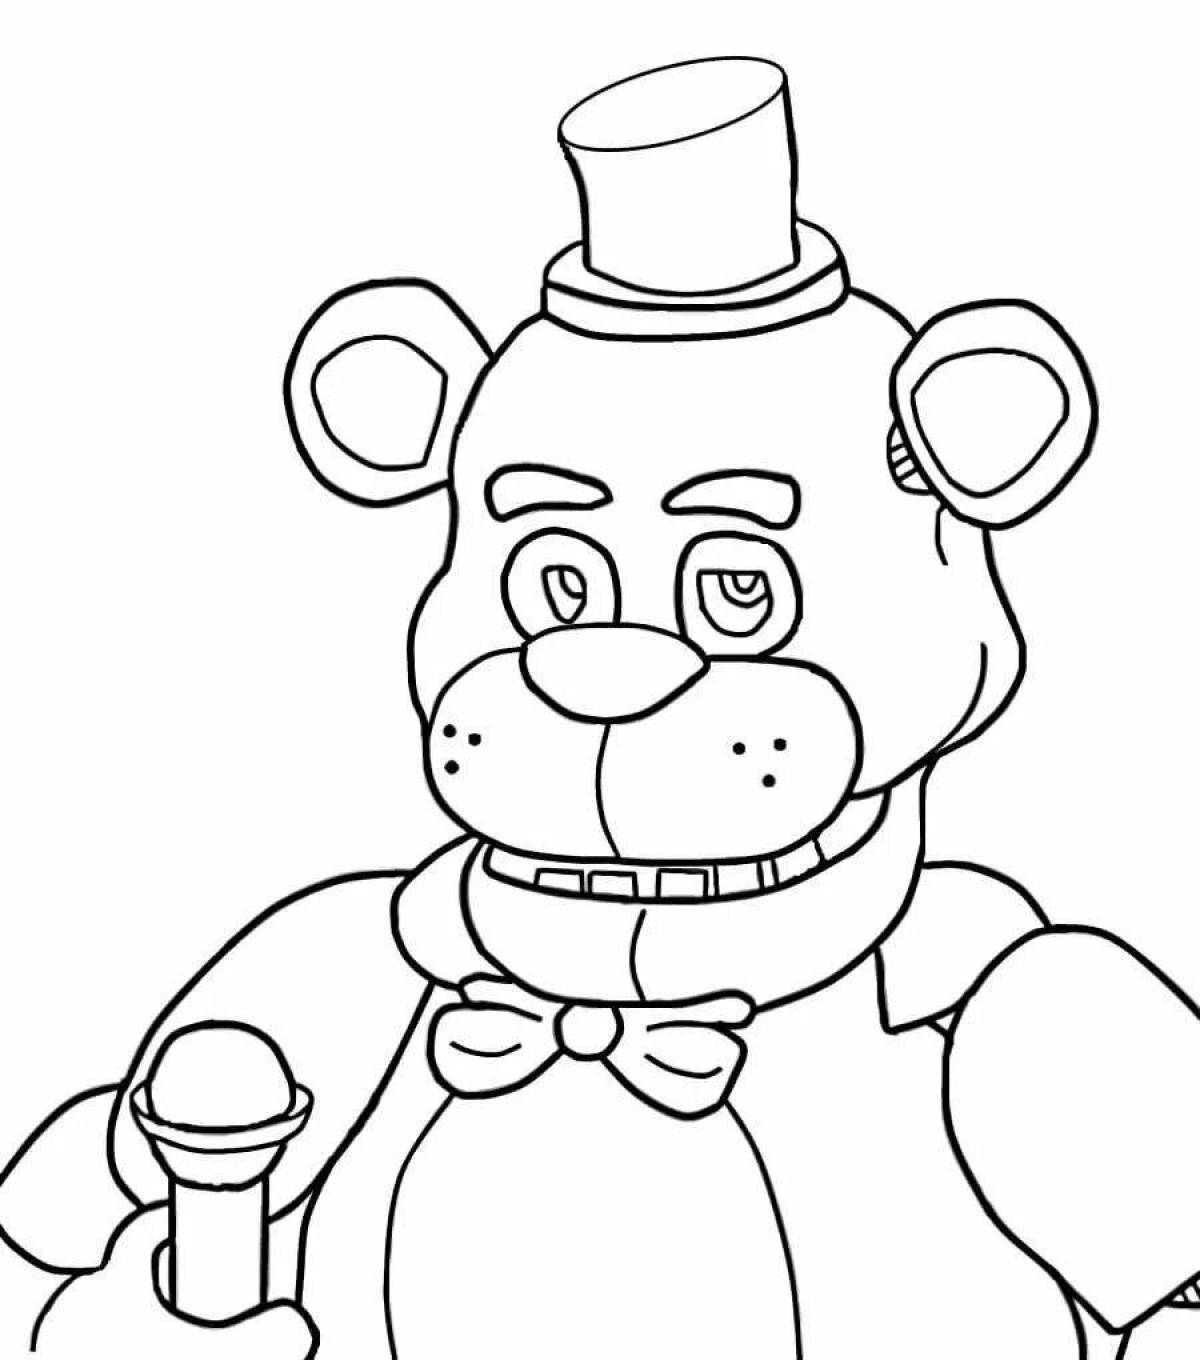 Exquisite official fnaf coloring